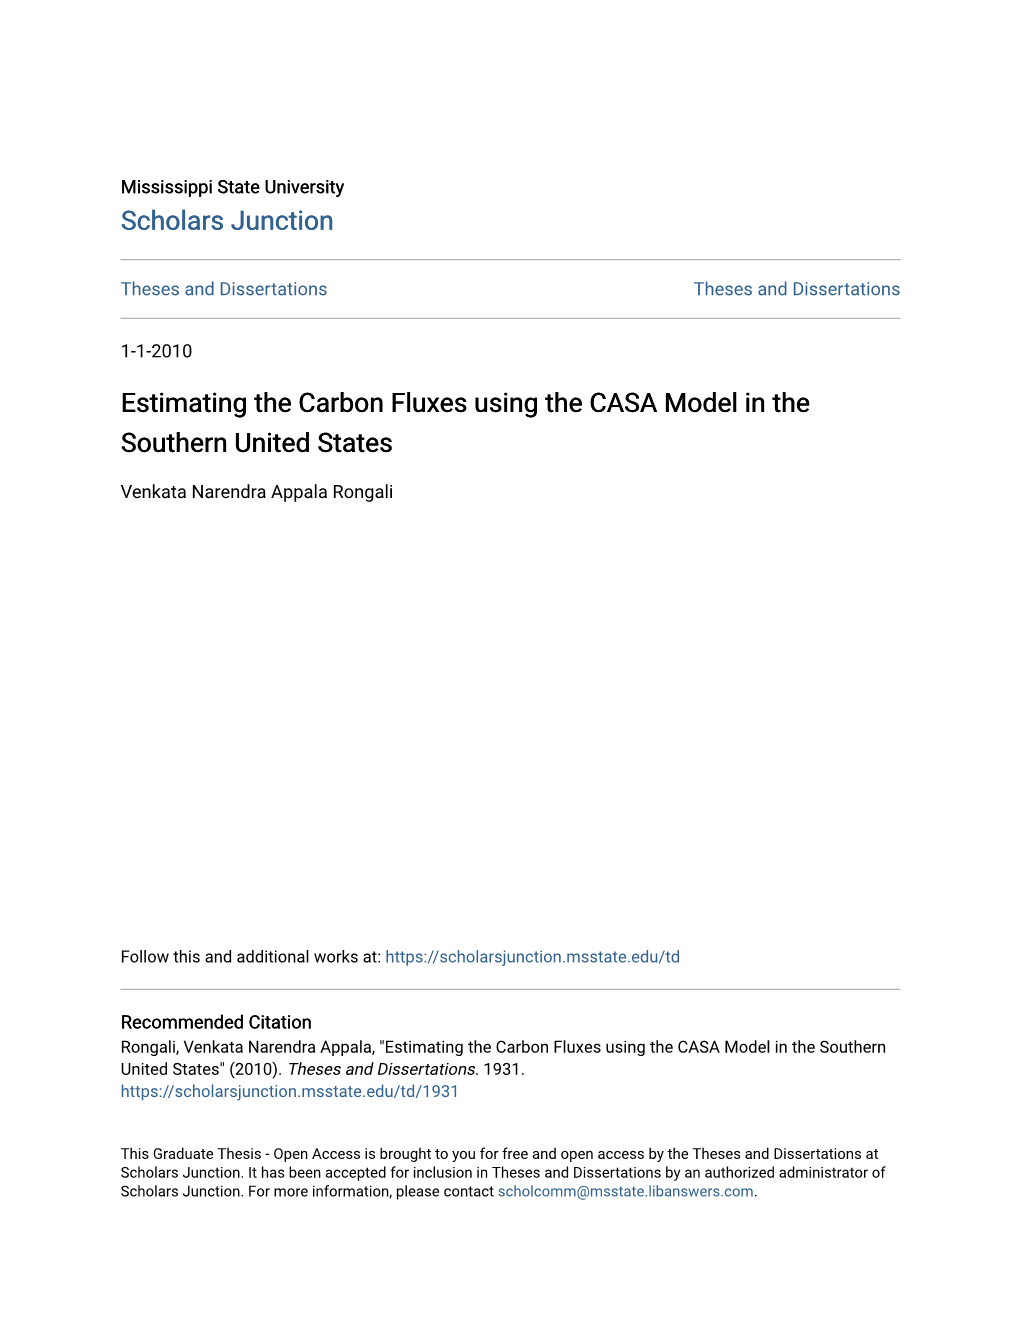 Estimating the Carbon Fluxes Using the CASA Model in the Southern United States